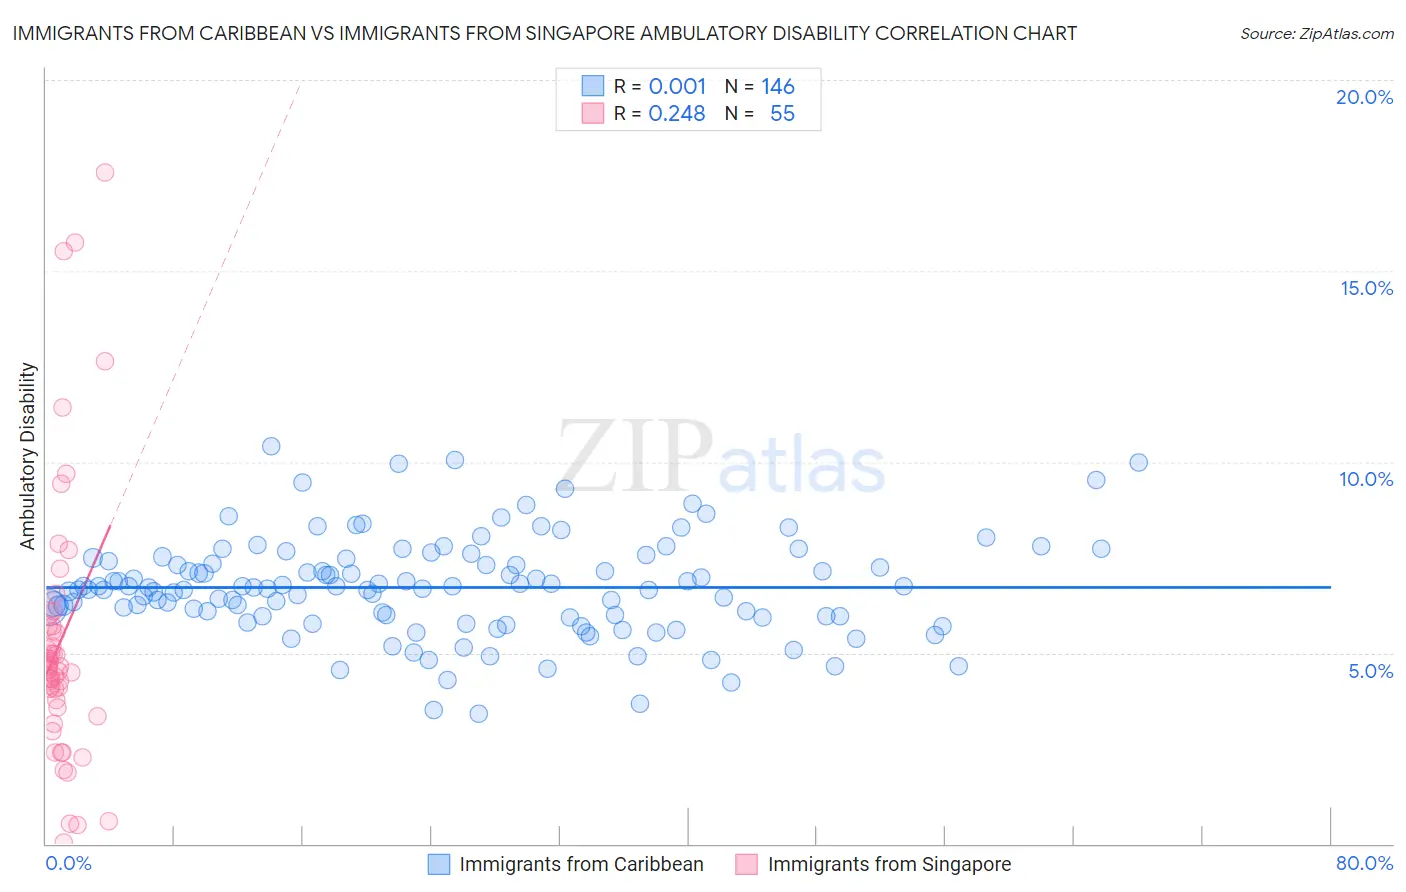 Immigrants from Caribbean vs Immigrants from Singapore Ambulatory Disability